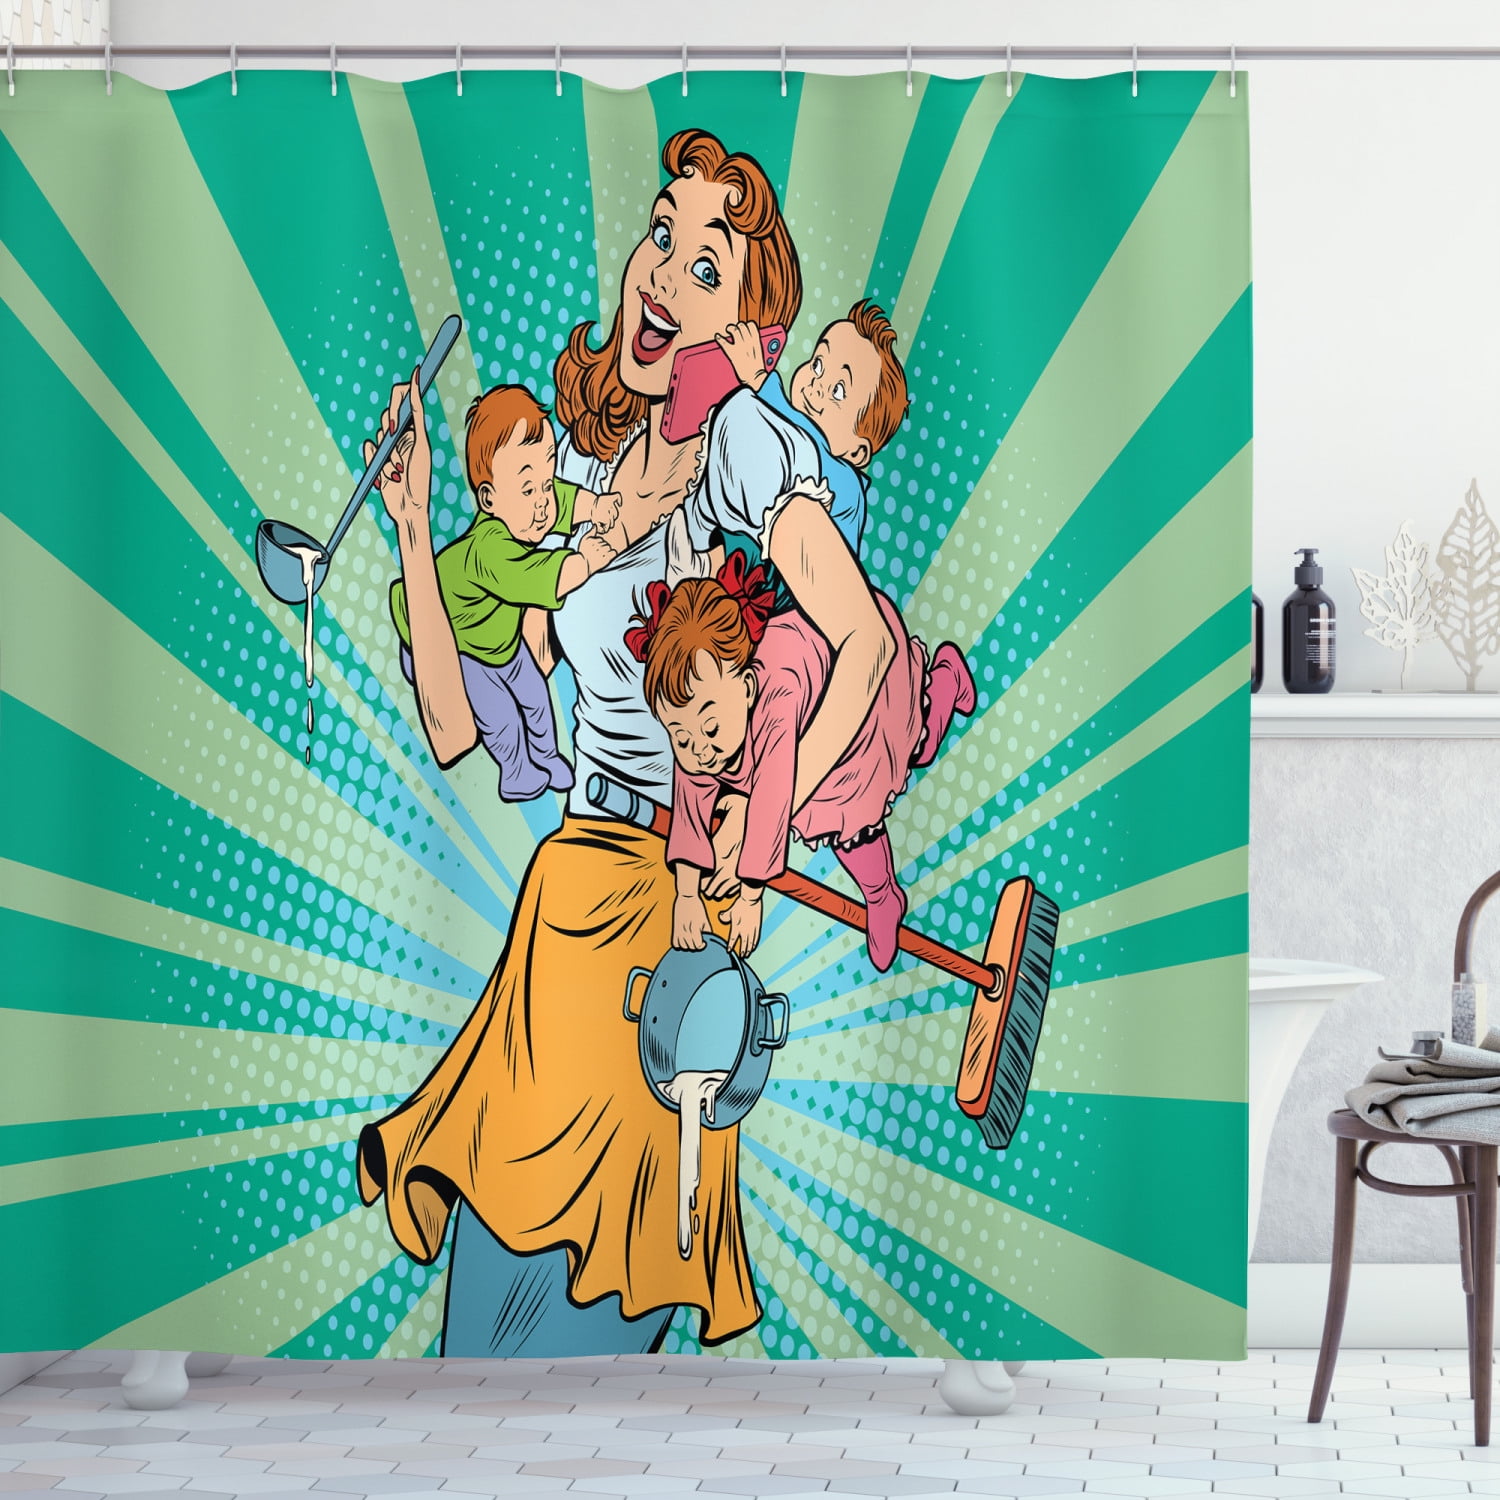 Call Mom Shower Curtain, Cartoon Style Mother with House Chores and Kids  Pop Art Design Starburst Lines, Fabric Bathroom Set with Hooks, 69W X 75L  Inches Long, Multicolor, by Ambesonne 